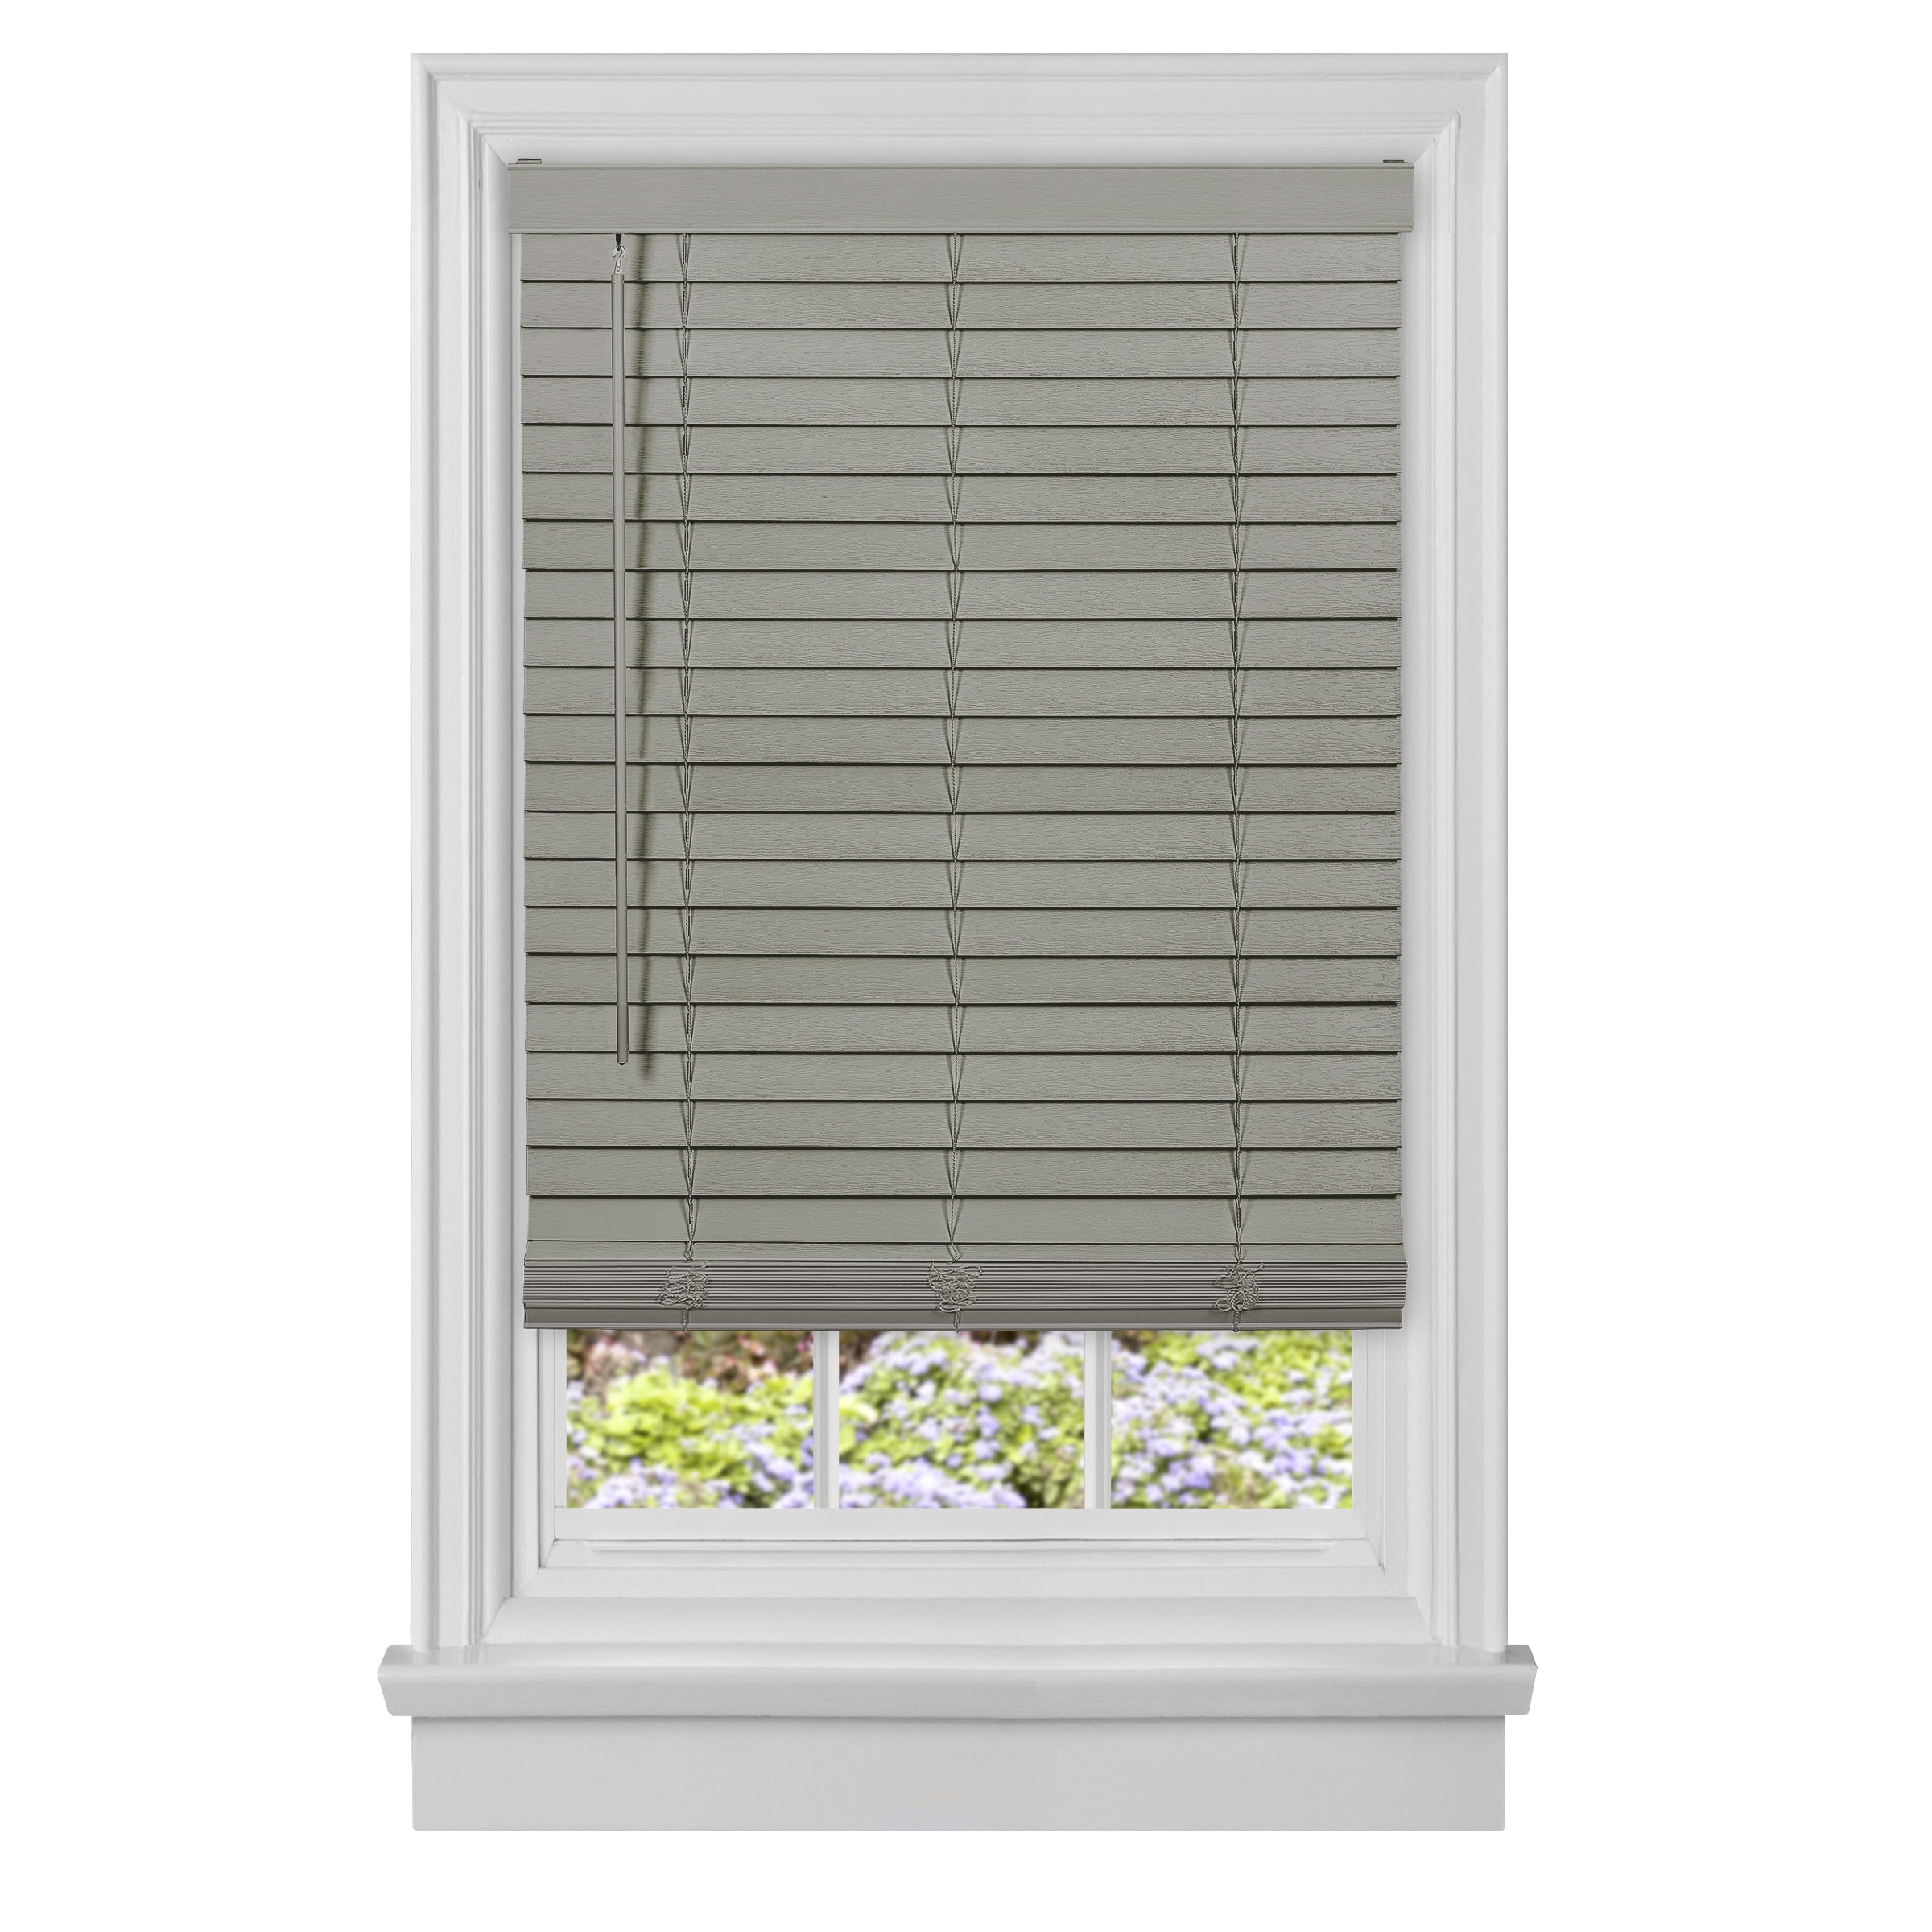 Picture of Achim MFG235GY02 35 x 64 in. Cordless GII Madera Falsa 2 in. Faux Wood Plantation Blind - Grey